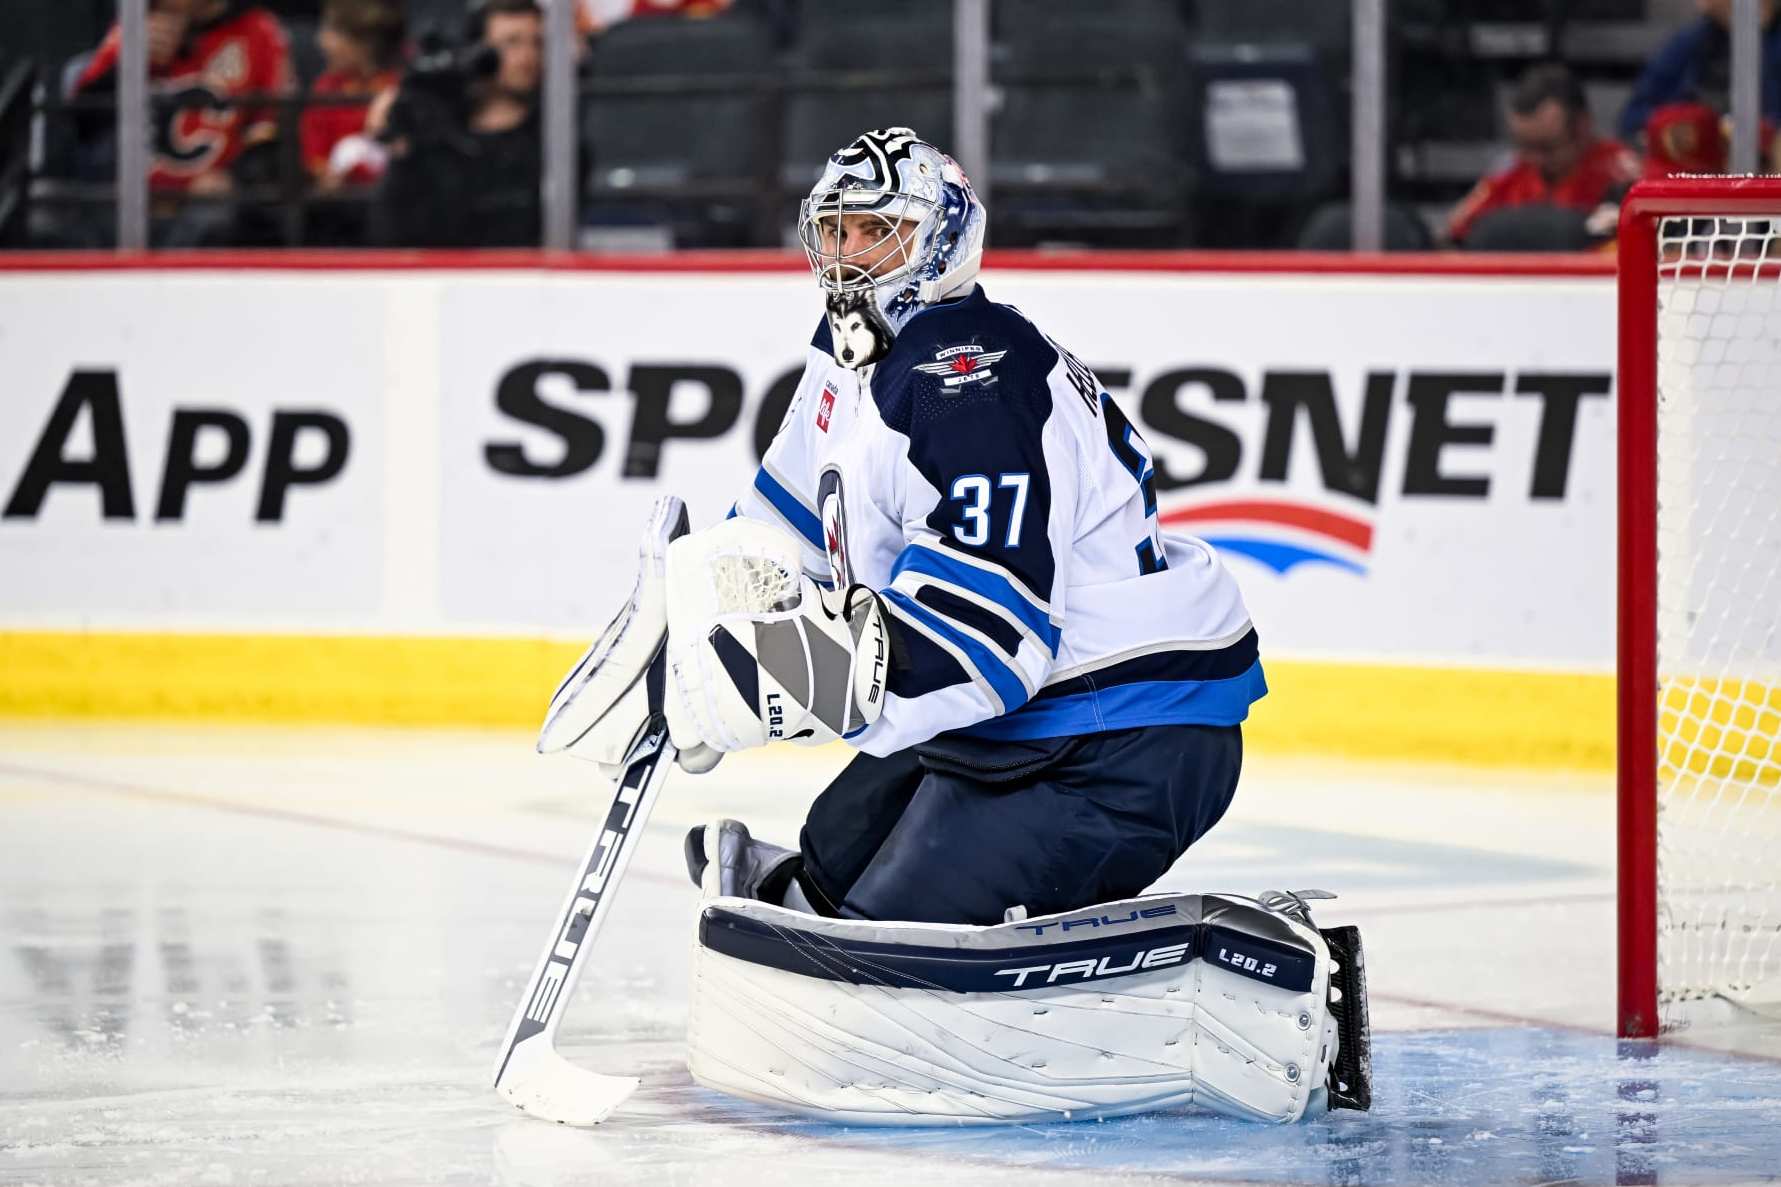 Scheifele, Hellebuyck each signs 7-year, $59.5 million contract with Jets